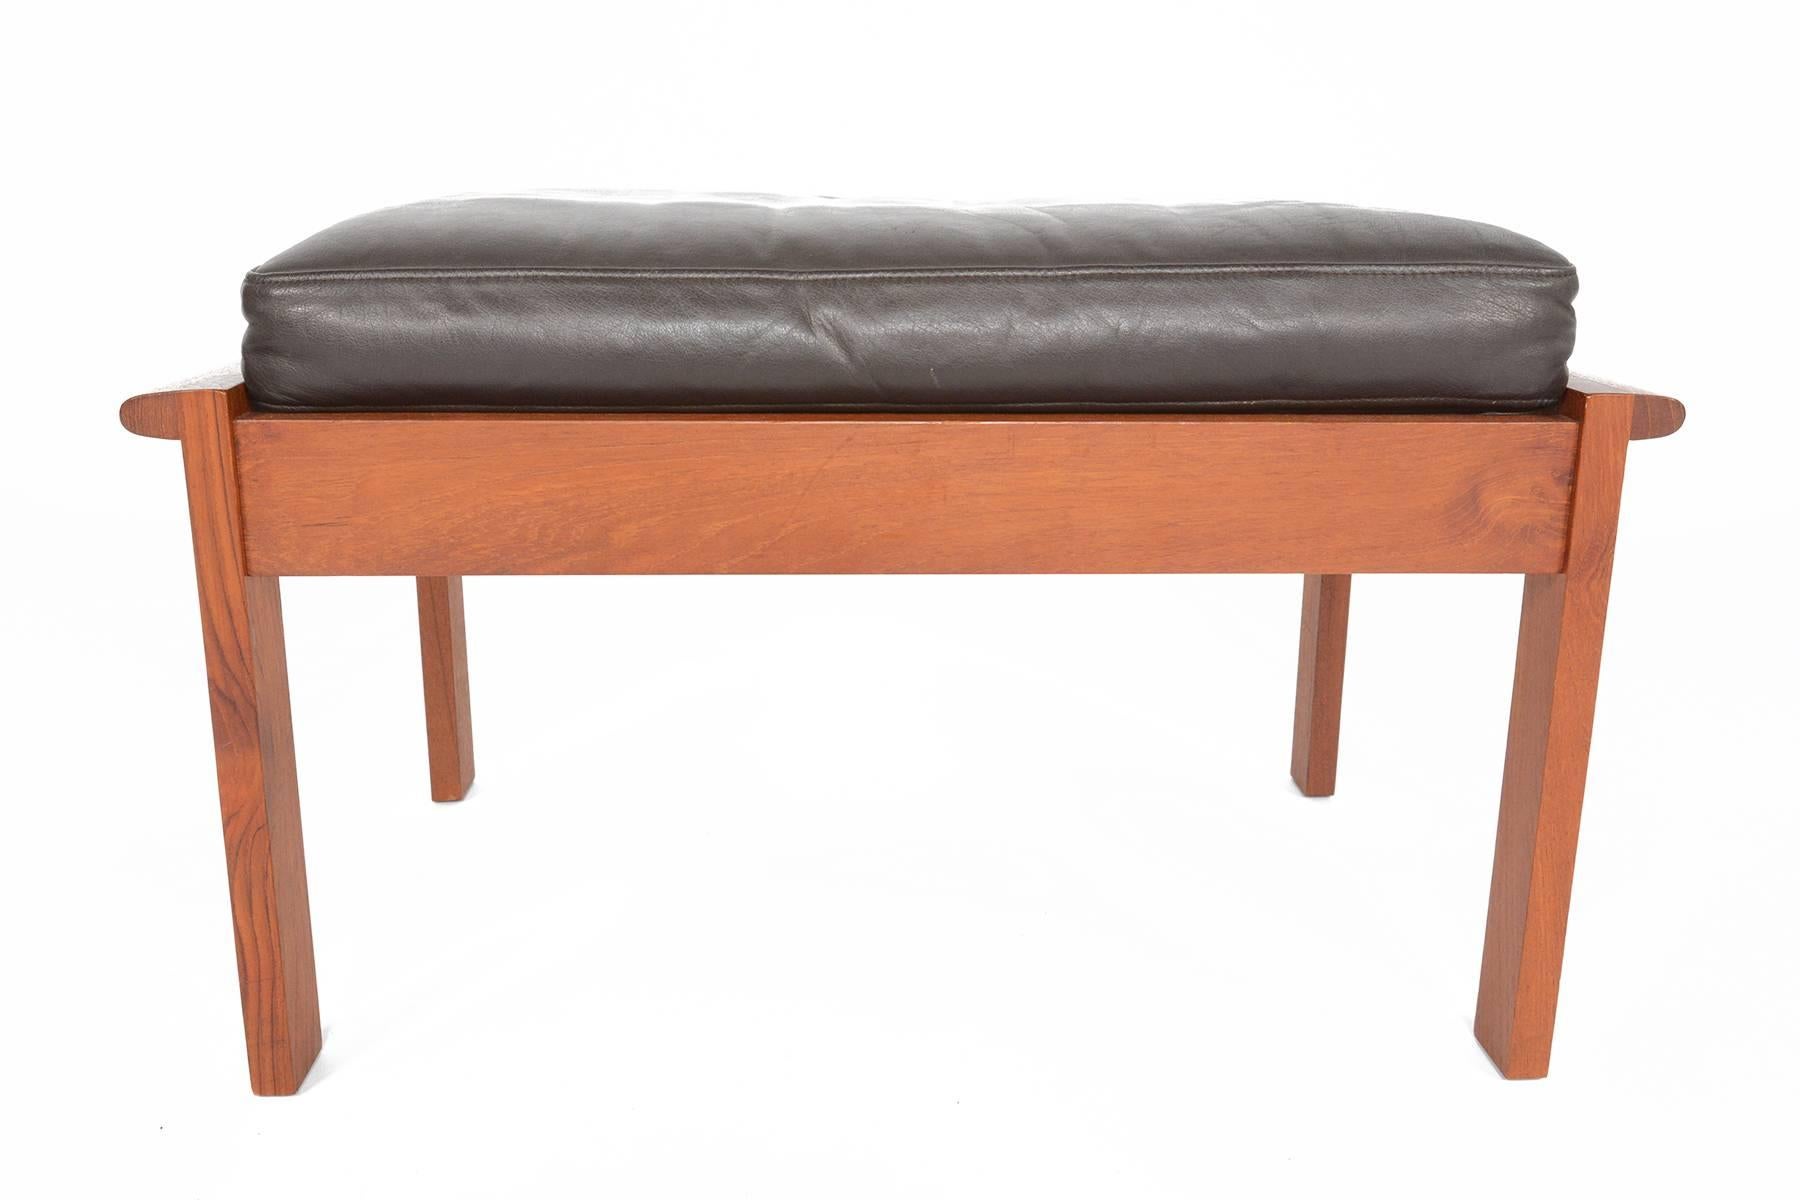 This beautifully sculpted teak ottoman known as the ' Capella' model was designed by Illum Wikkelsø for Niels Eilersen in 1959. Expertly crafted from solid teak, this ottoman features elegant box joints and flared sides. The frame holds its original